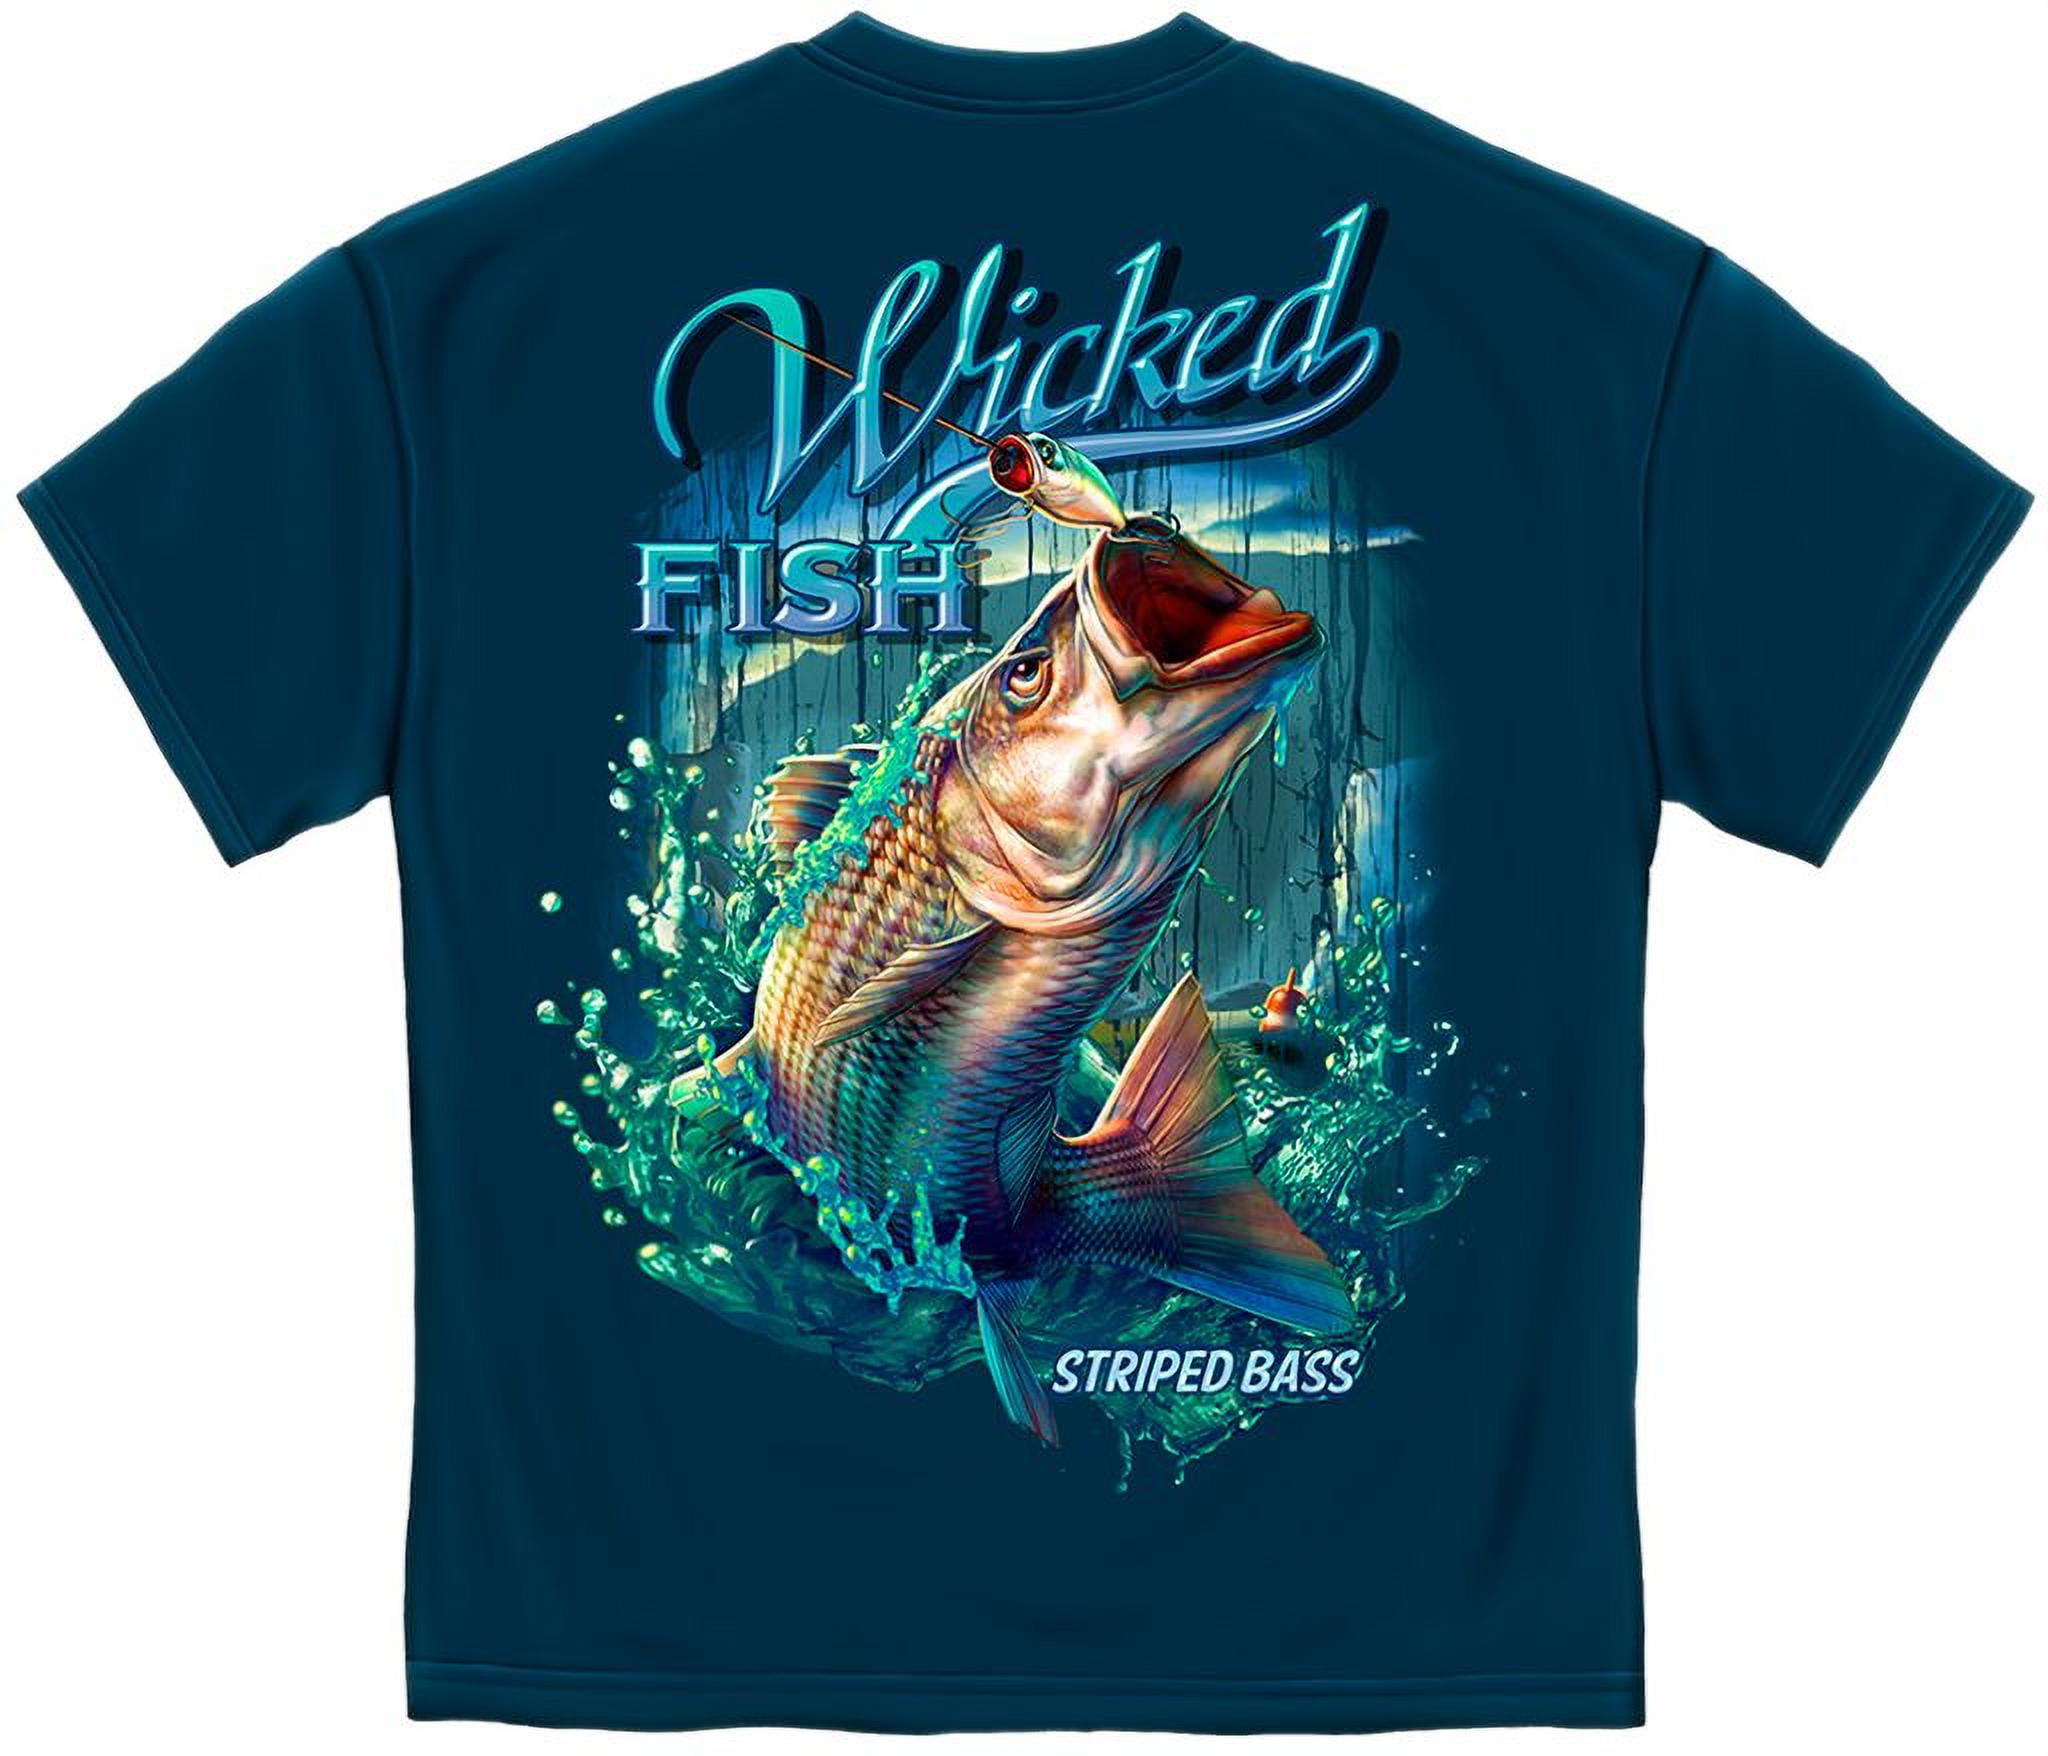 Cotton Wicked Fish Striped Bass With Popper Air Born T-Shirt